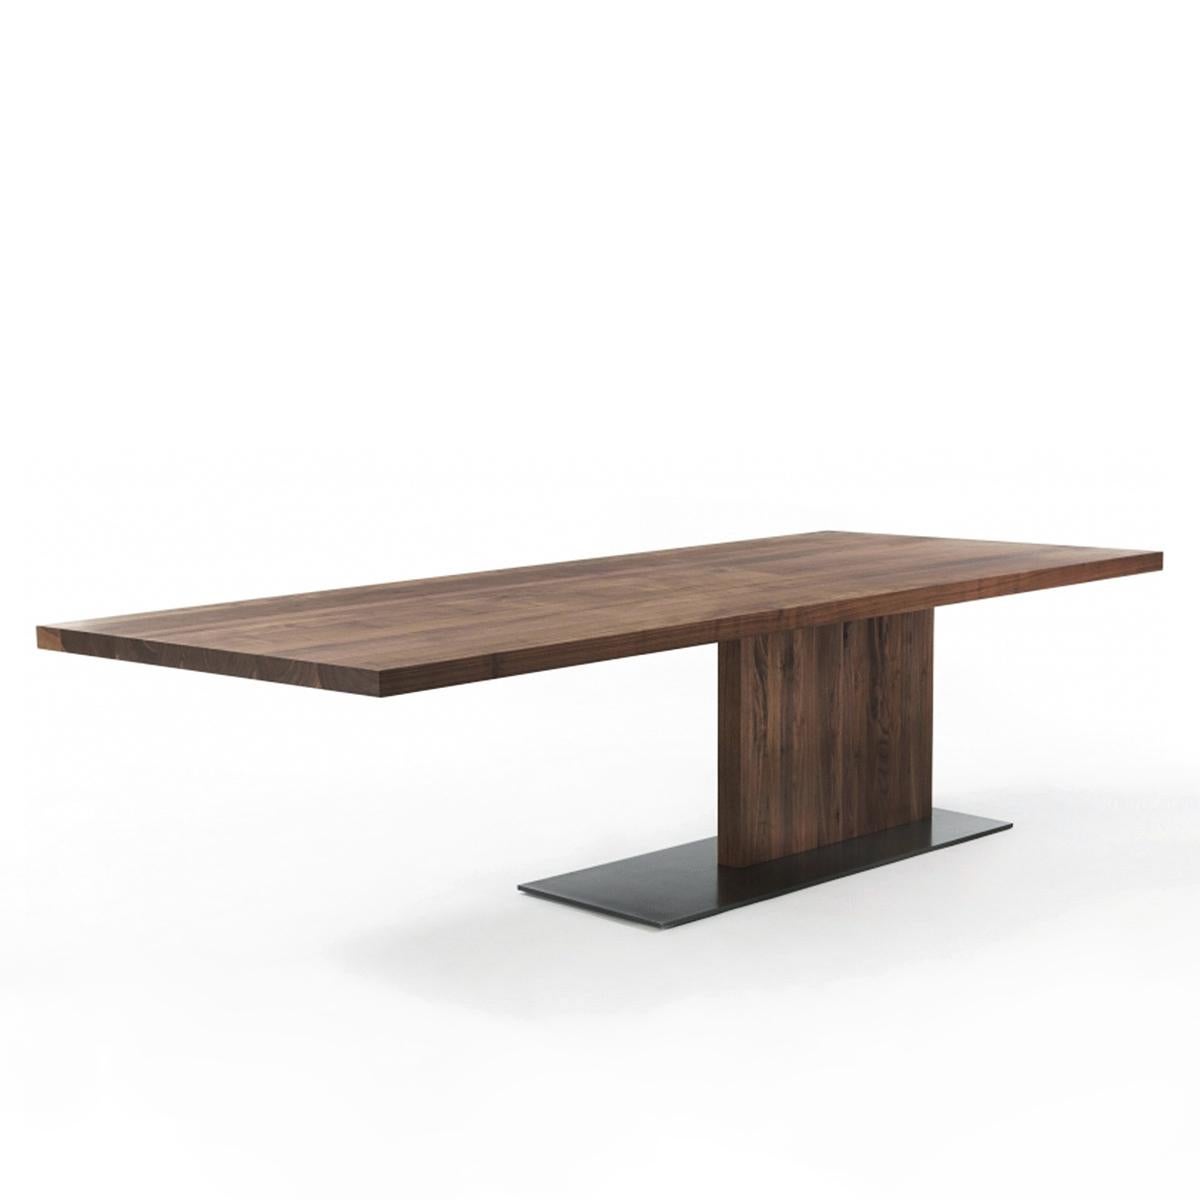 Dining table stage walnut with solid walnut wood
top made with glued slats with straight edges. With
solid walnut straight base. On lacquered iron base.
Available in
L 200 x D 100 x H 75 cm, price 11400,00€.
L 220 x D 100 x H 75 cm, price